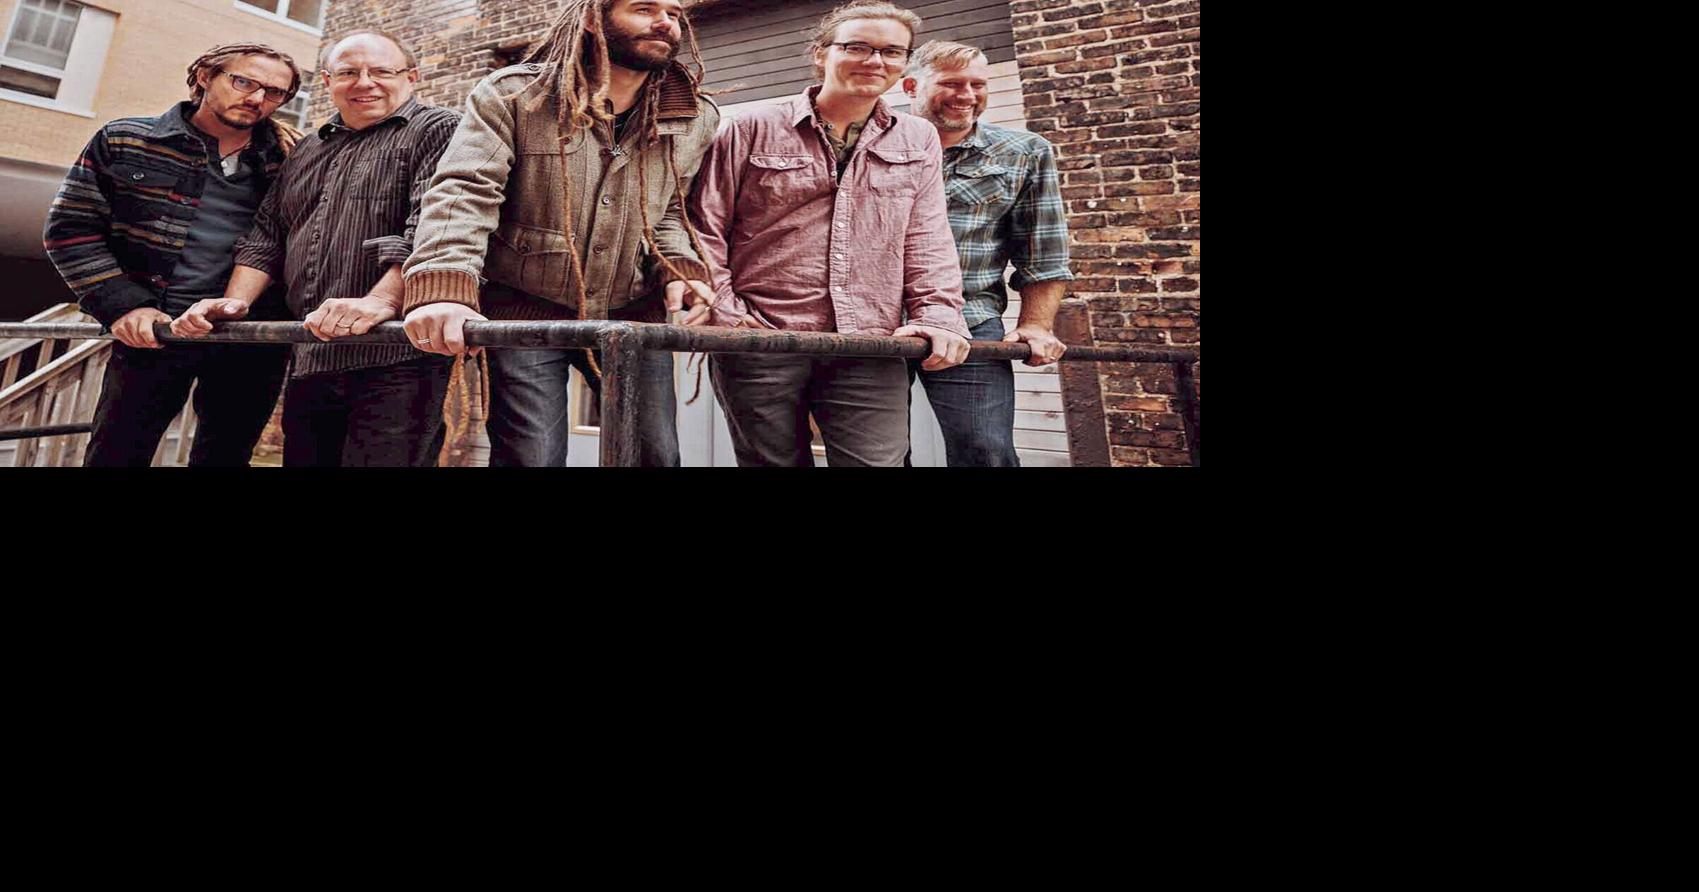 Chicken Wire Empire will return to Ripon concert series Friday What